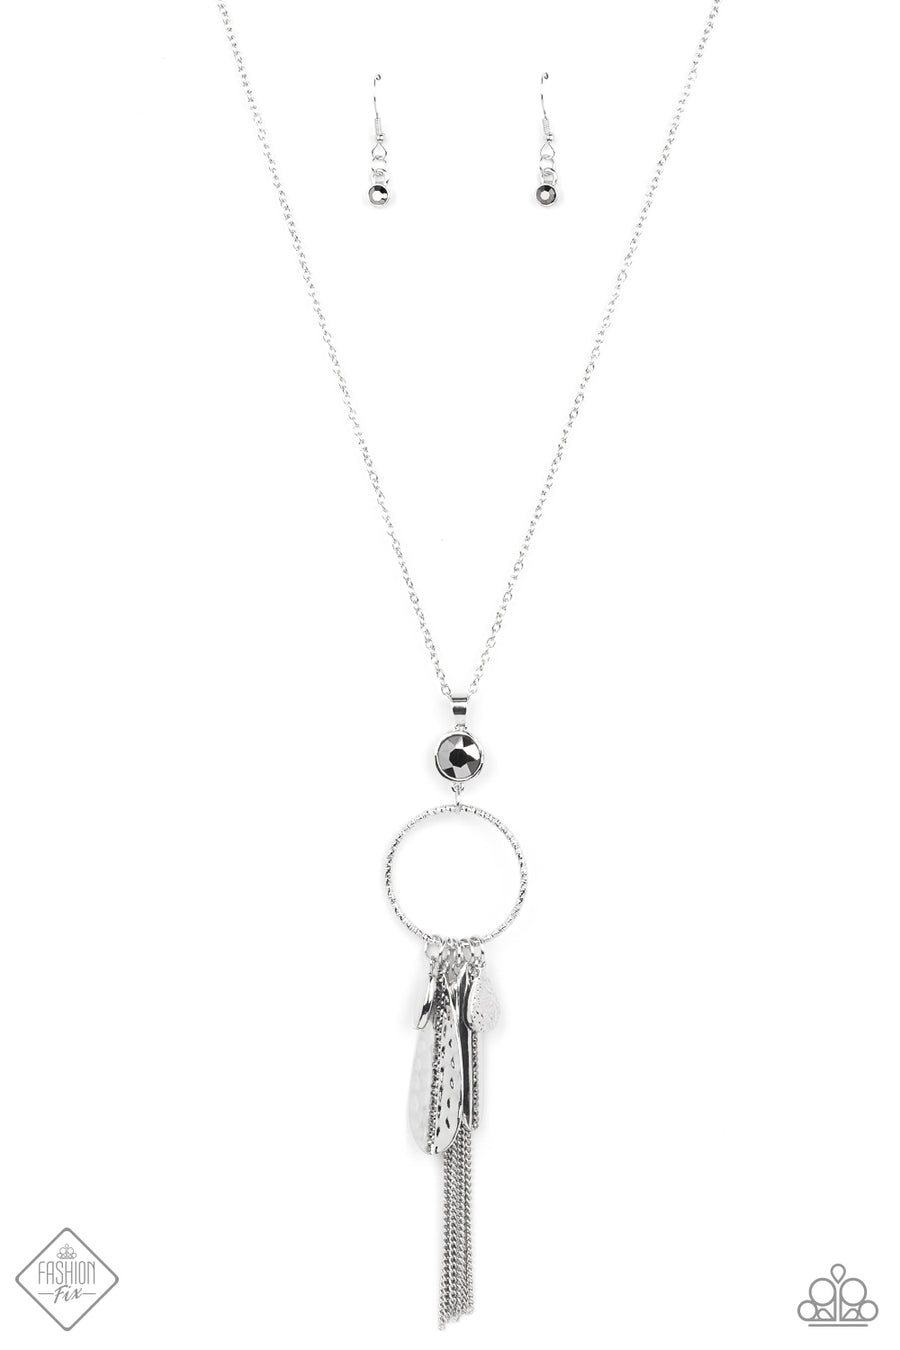 Paparazzi Tastefully Tasseled - Silver Charm Necklaces featuring both smooth and hammered finishes, dainty smoky rhinestones, and a tassel of dainty chains, a sassy collection of silver charms swings from the bottom of a brightly textured circle. A faceted hematite gem sits atop the harmoniously audacious display at the bottom of a lengthened dainty silver chain for a crowning finish. Features an adjustable clasp closure.  Sold as one individual necklace. Includes one pair of matching earrings.